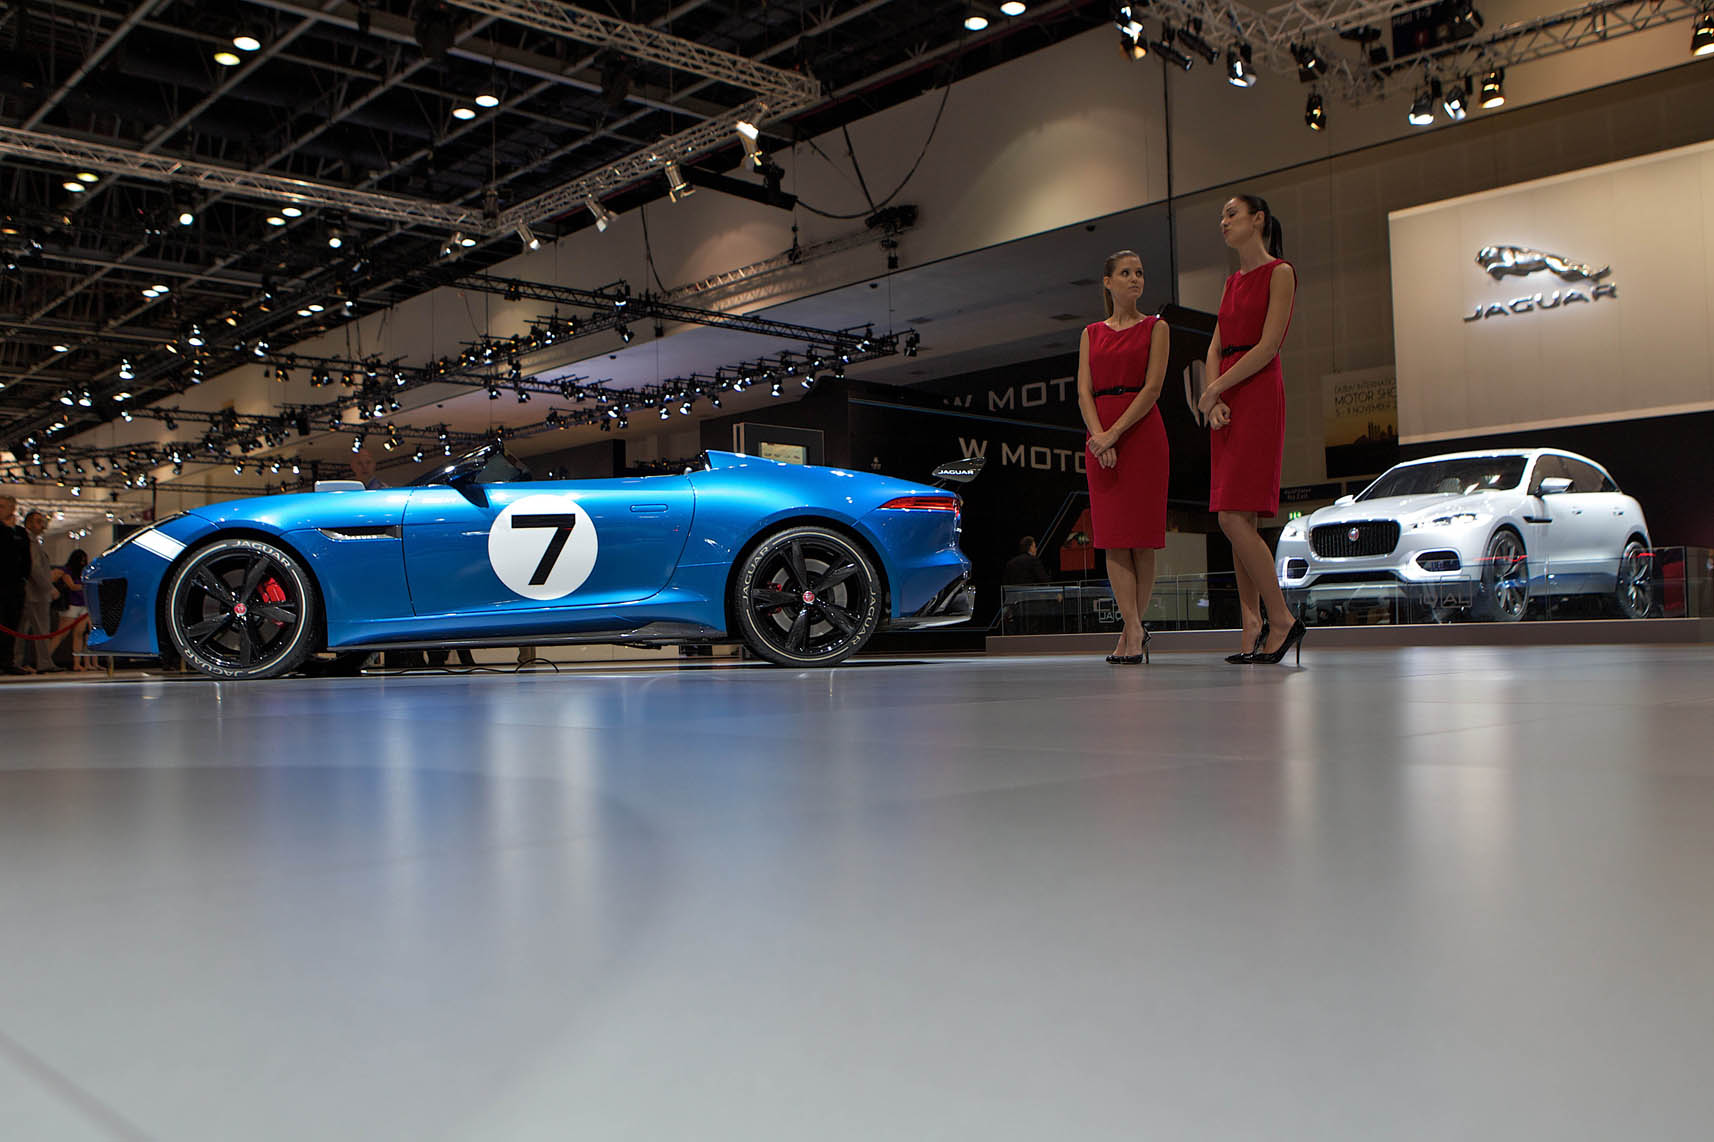 two women in red dresses stand next to the new jaguar car